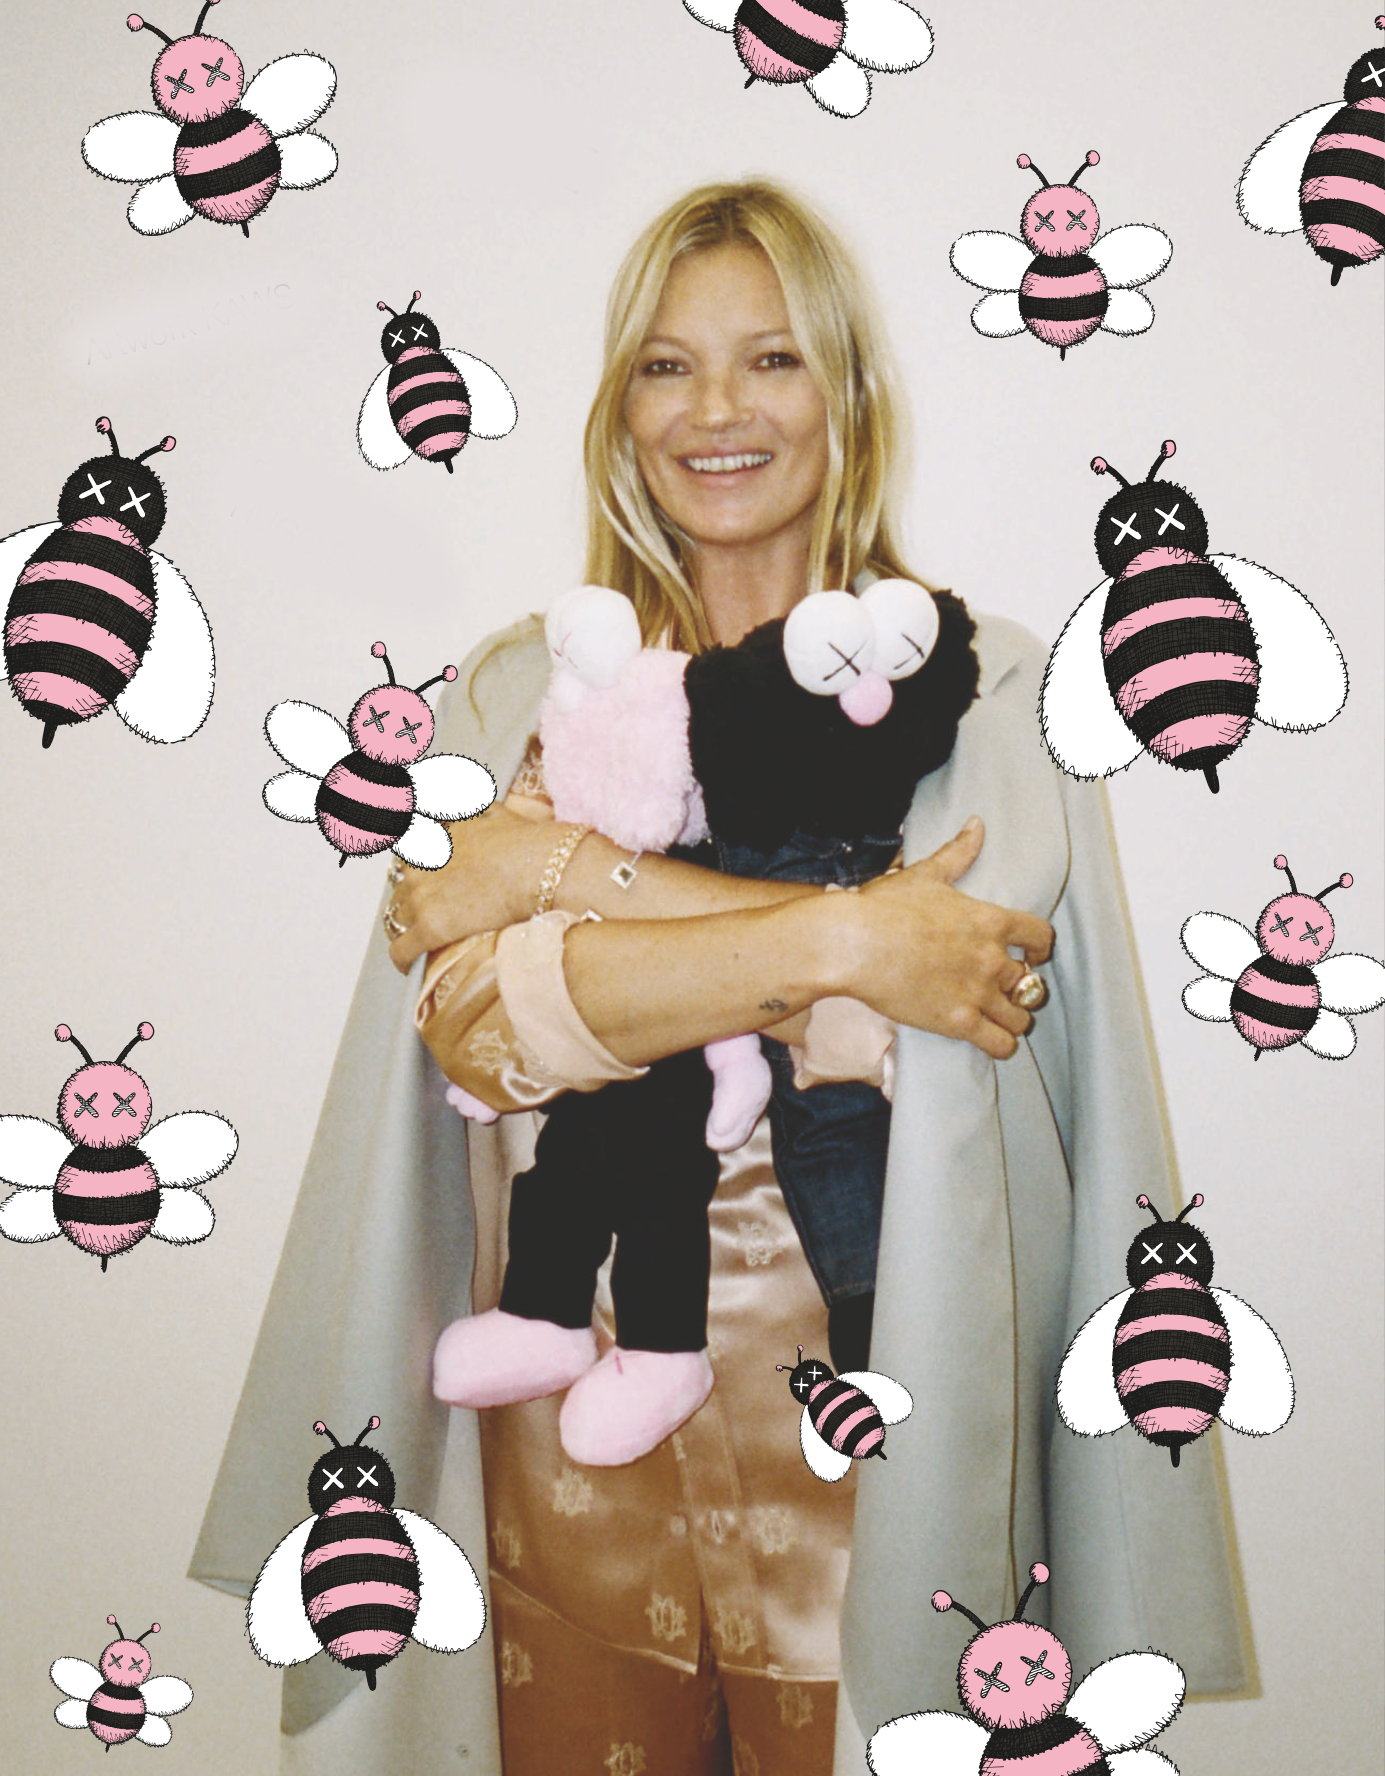 Dan Thawley | A Magazine Curated by Kim Jones | Kaws, who submitted an artwork featuring Kate Moss cuddling his signature plush toys, surrounded by the Kaws bee illustration designed by the artist for Jones’ first Dior Men show in June 2018.  | 28